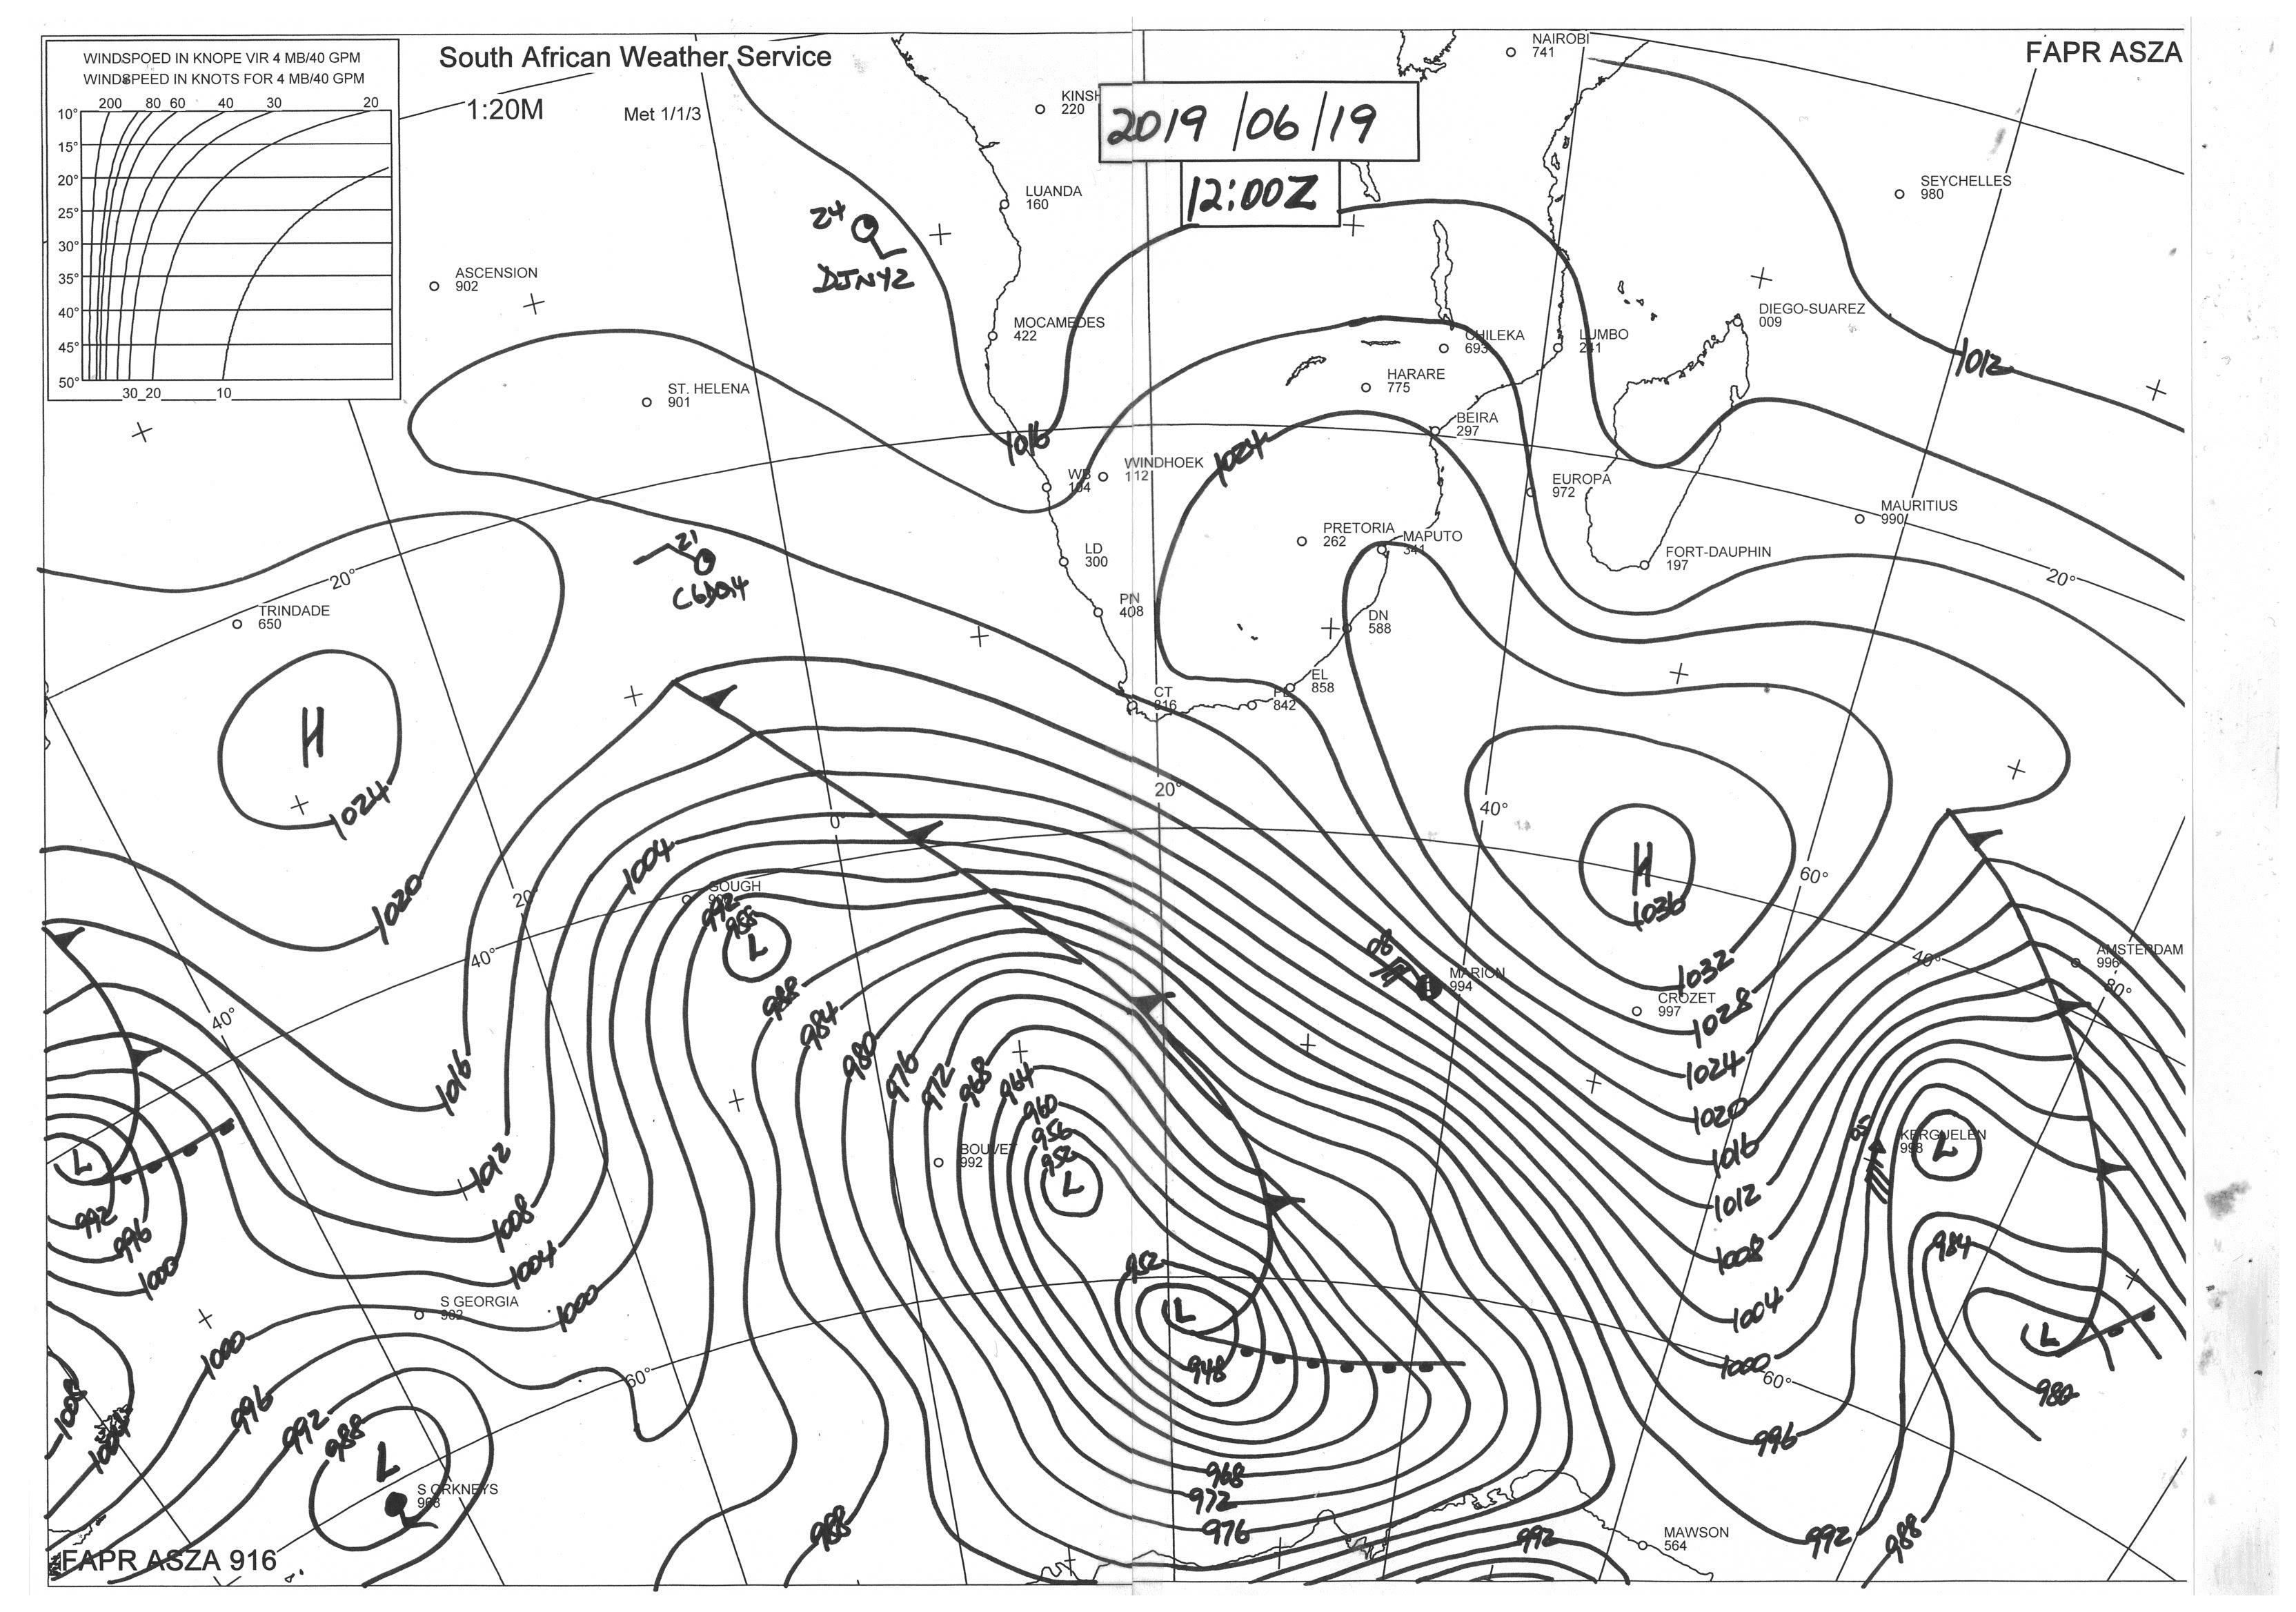 synoptic-chart-weather-south-africa.jpg